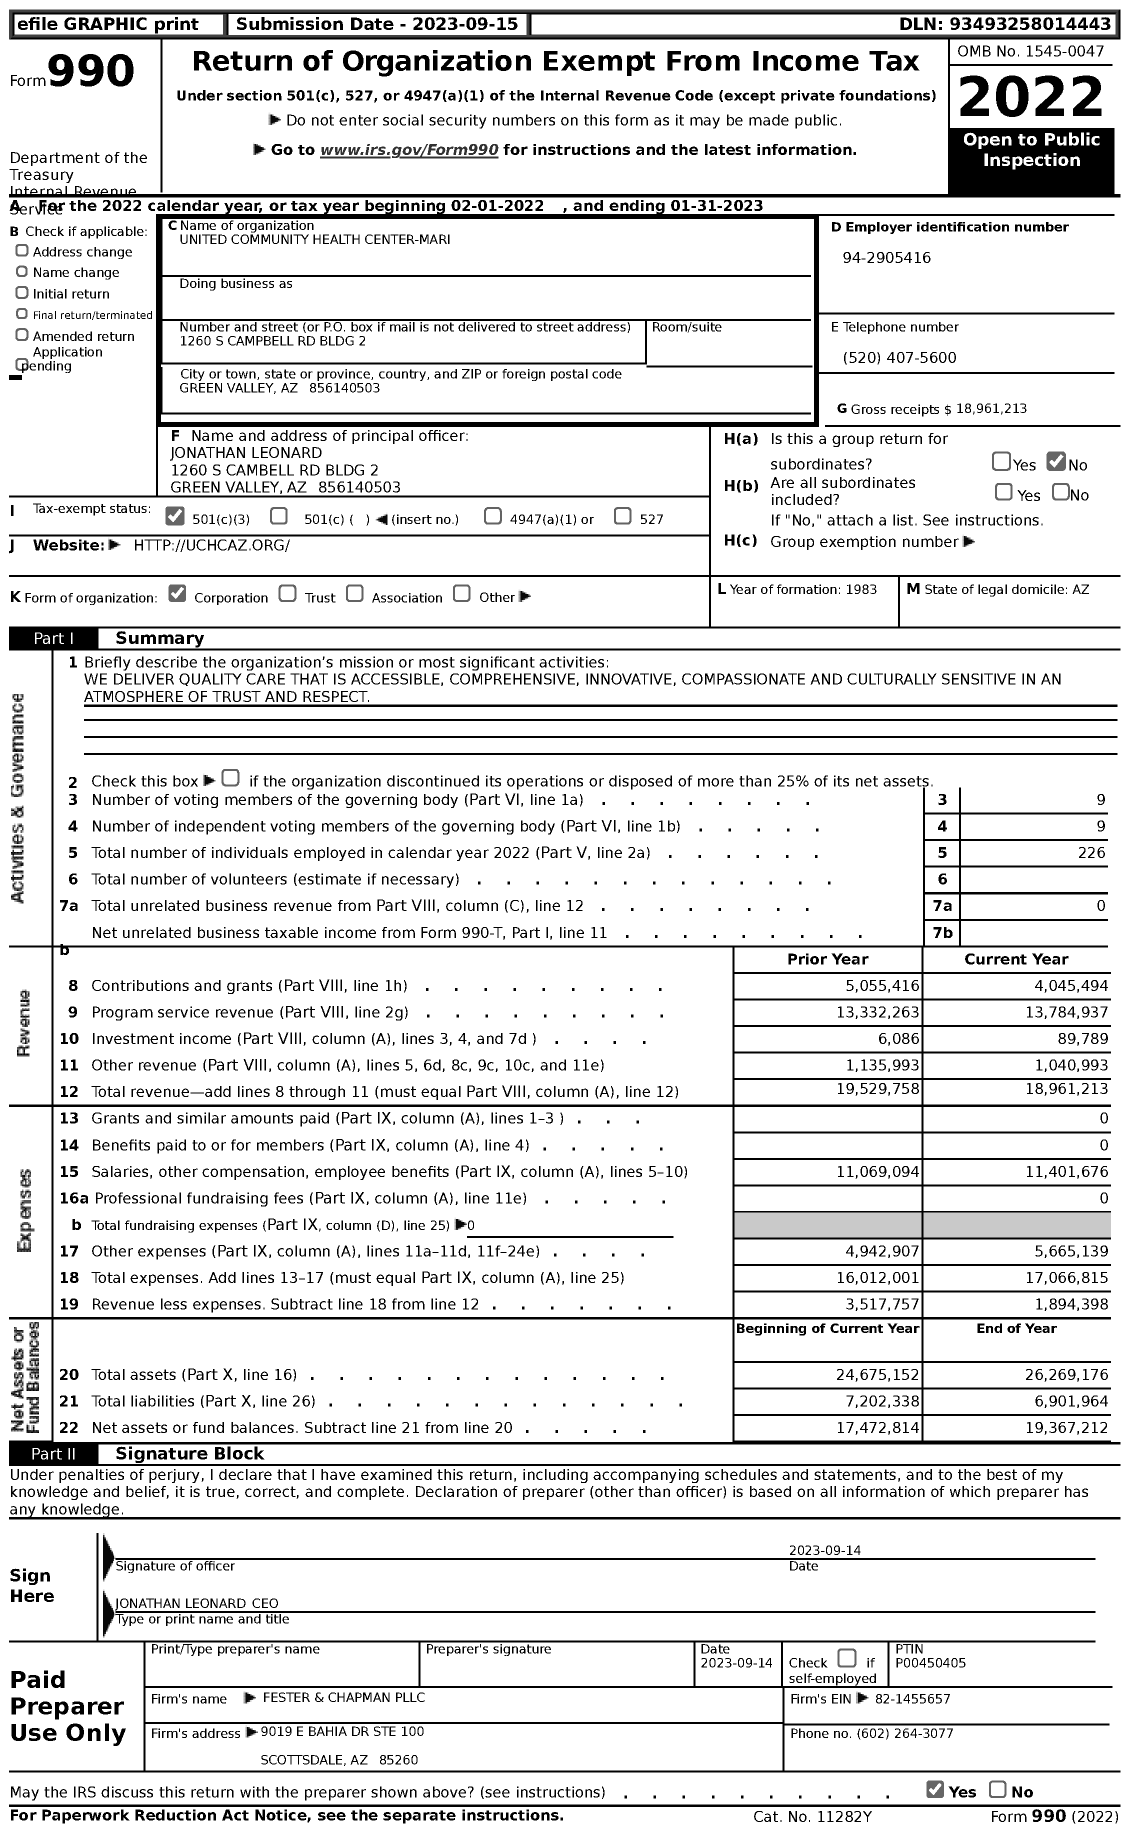 Image of first page of 2022 Form 990 for United Community Health Center-Mari (UCHC)